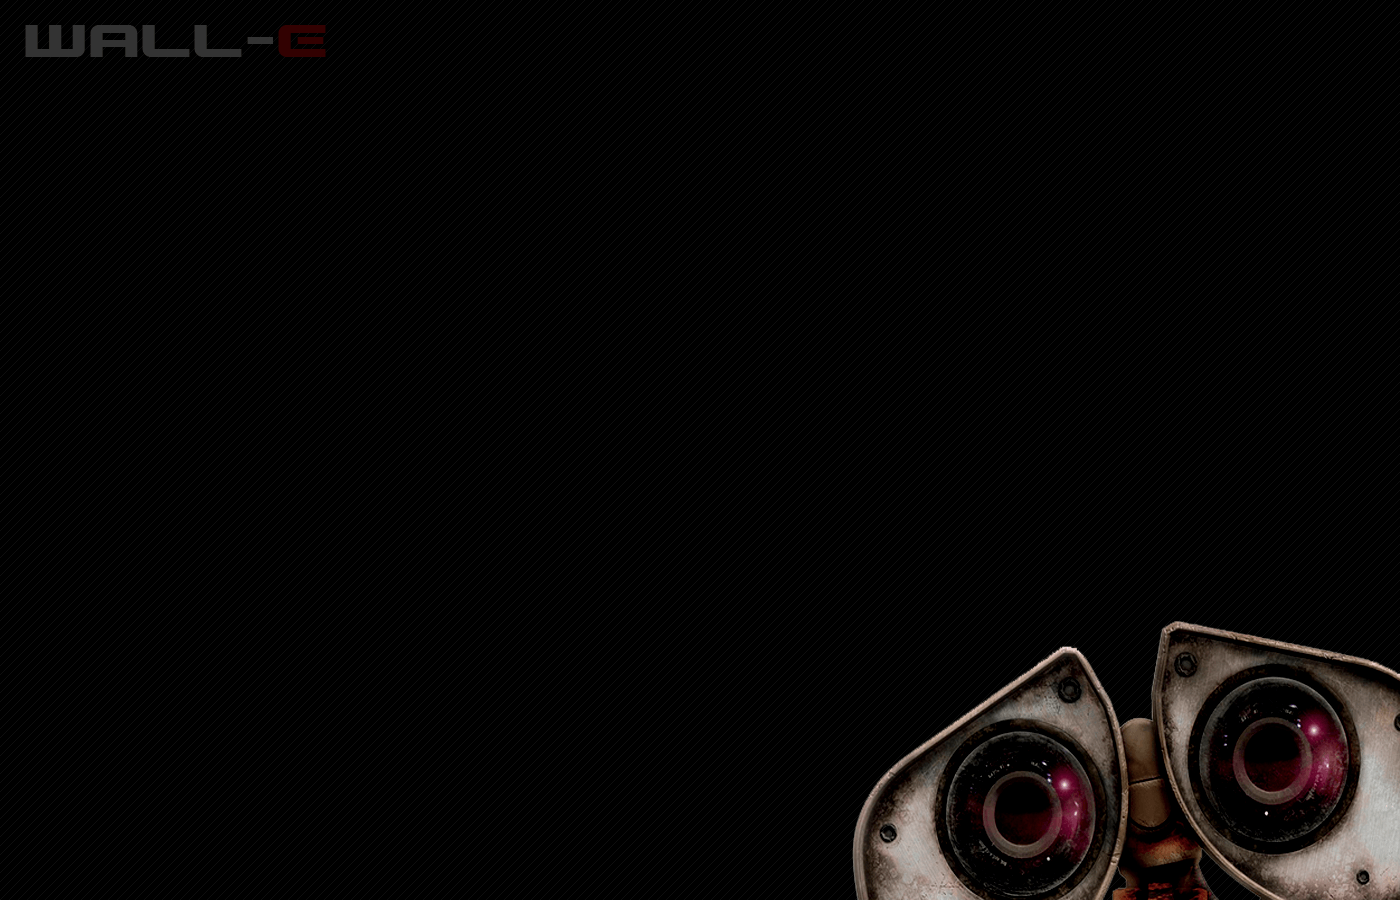 WALL E Wallpapers by Manuk